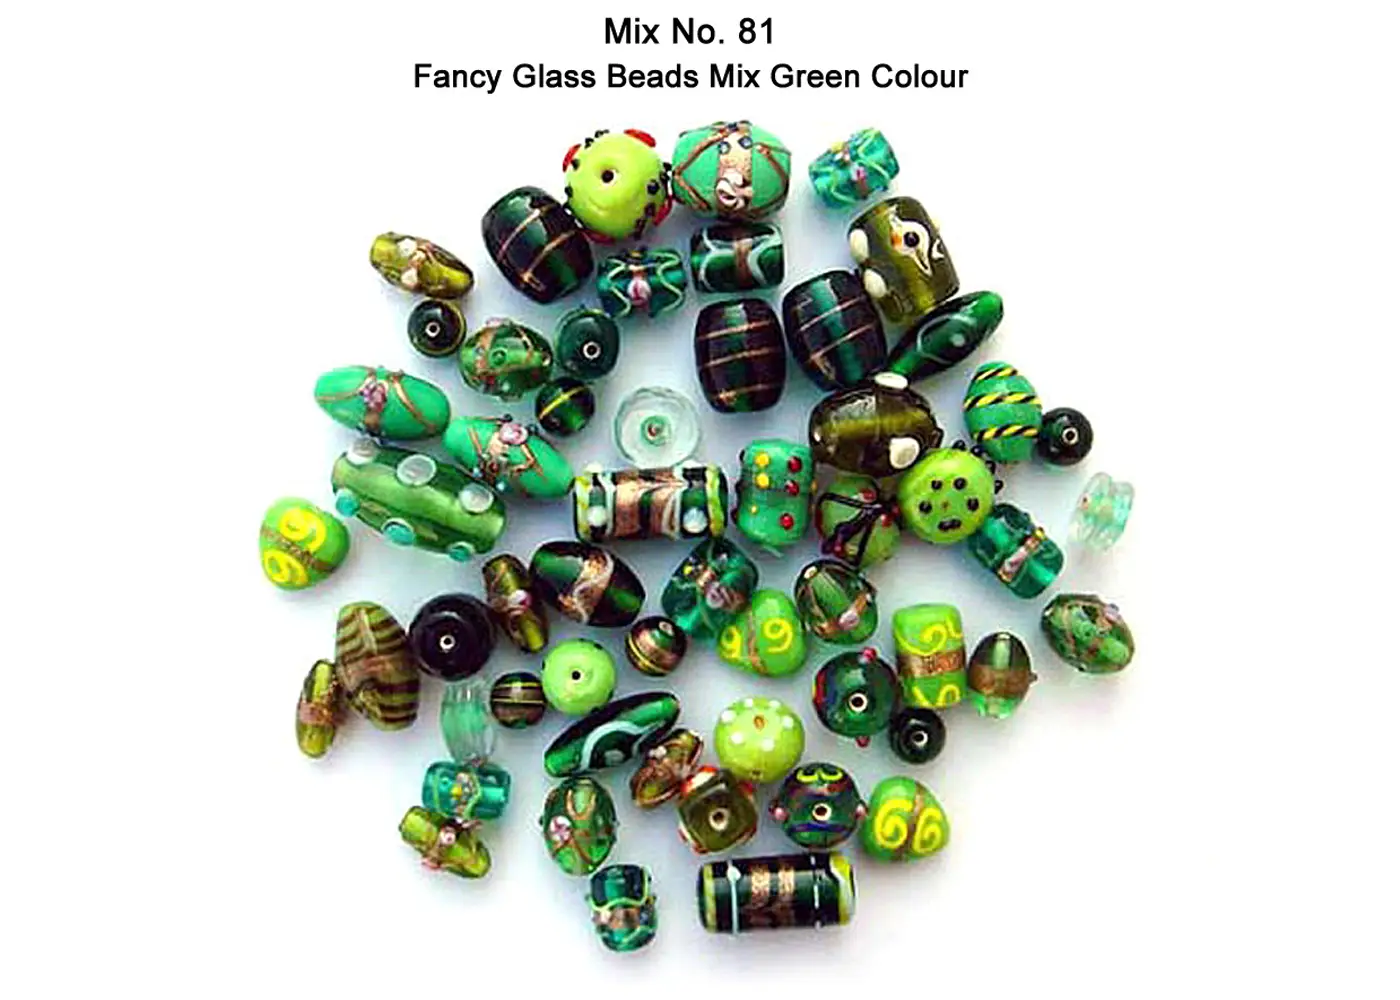 Fancy Glass Beads in Green color